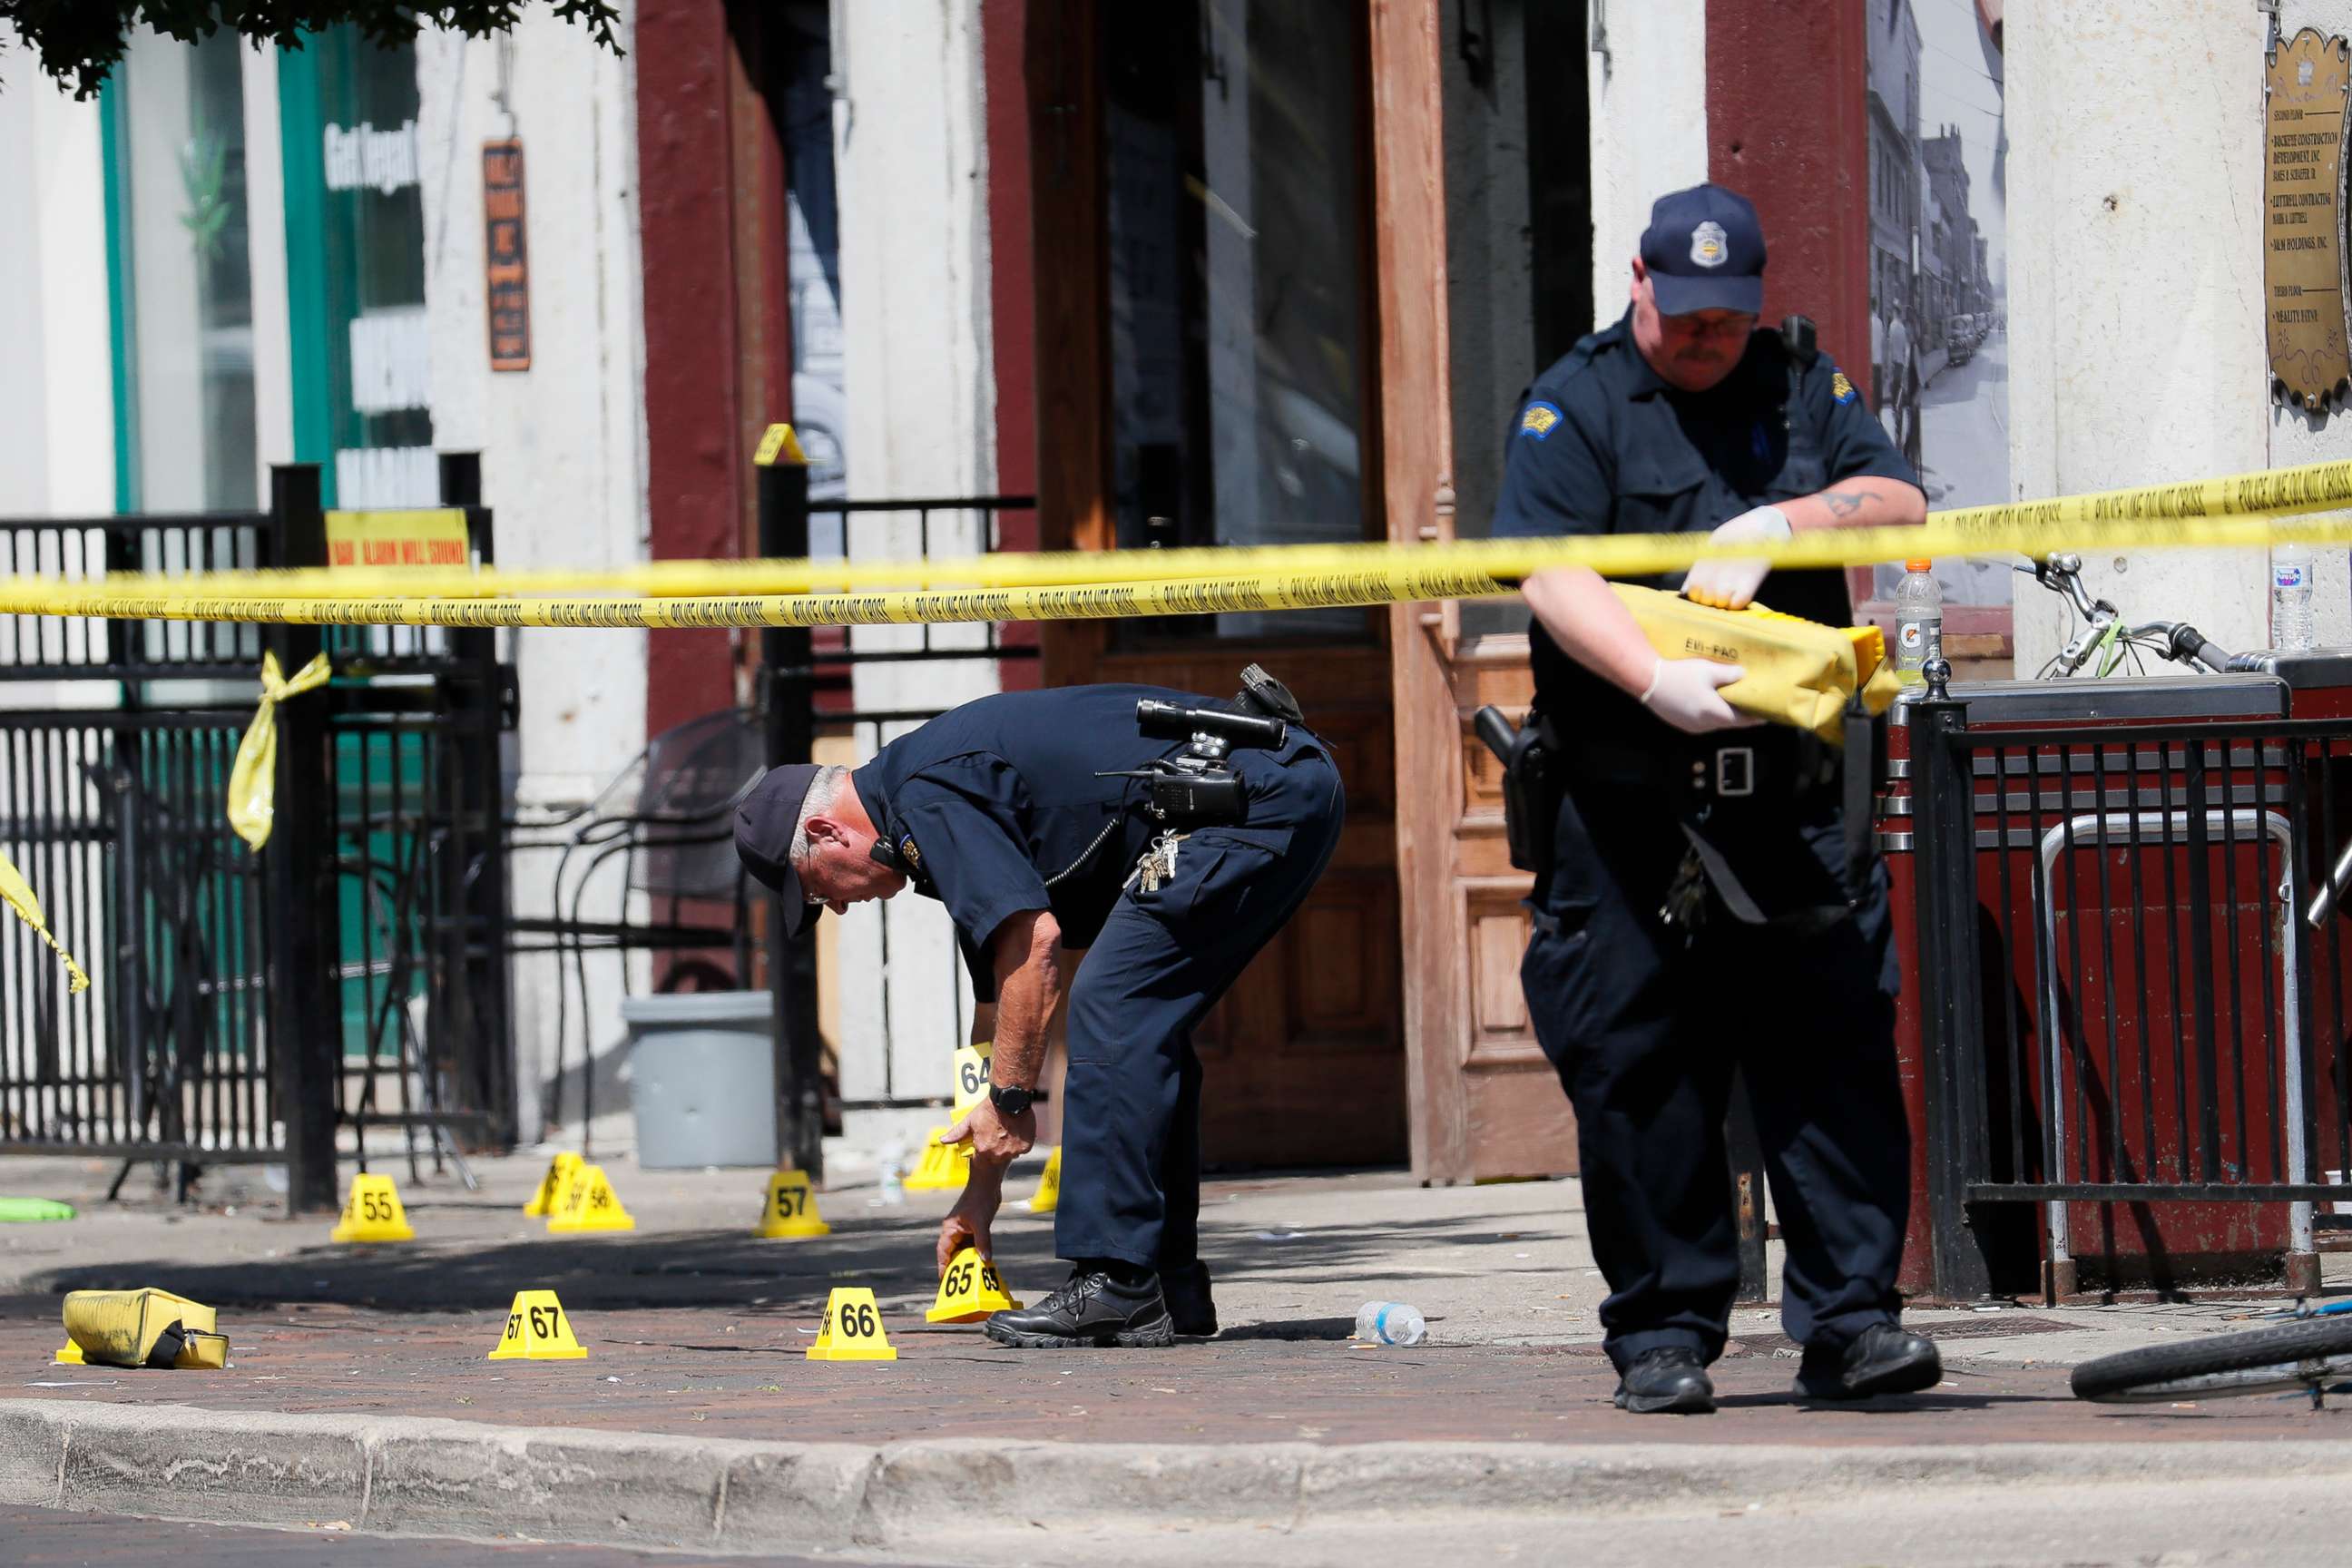 PHOTO: Authorities retrieve evidence markers at the scene of a mass shooting, Aug. 4, 2019, in Dayton, Ohio.